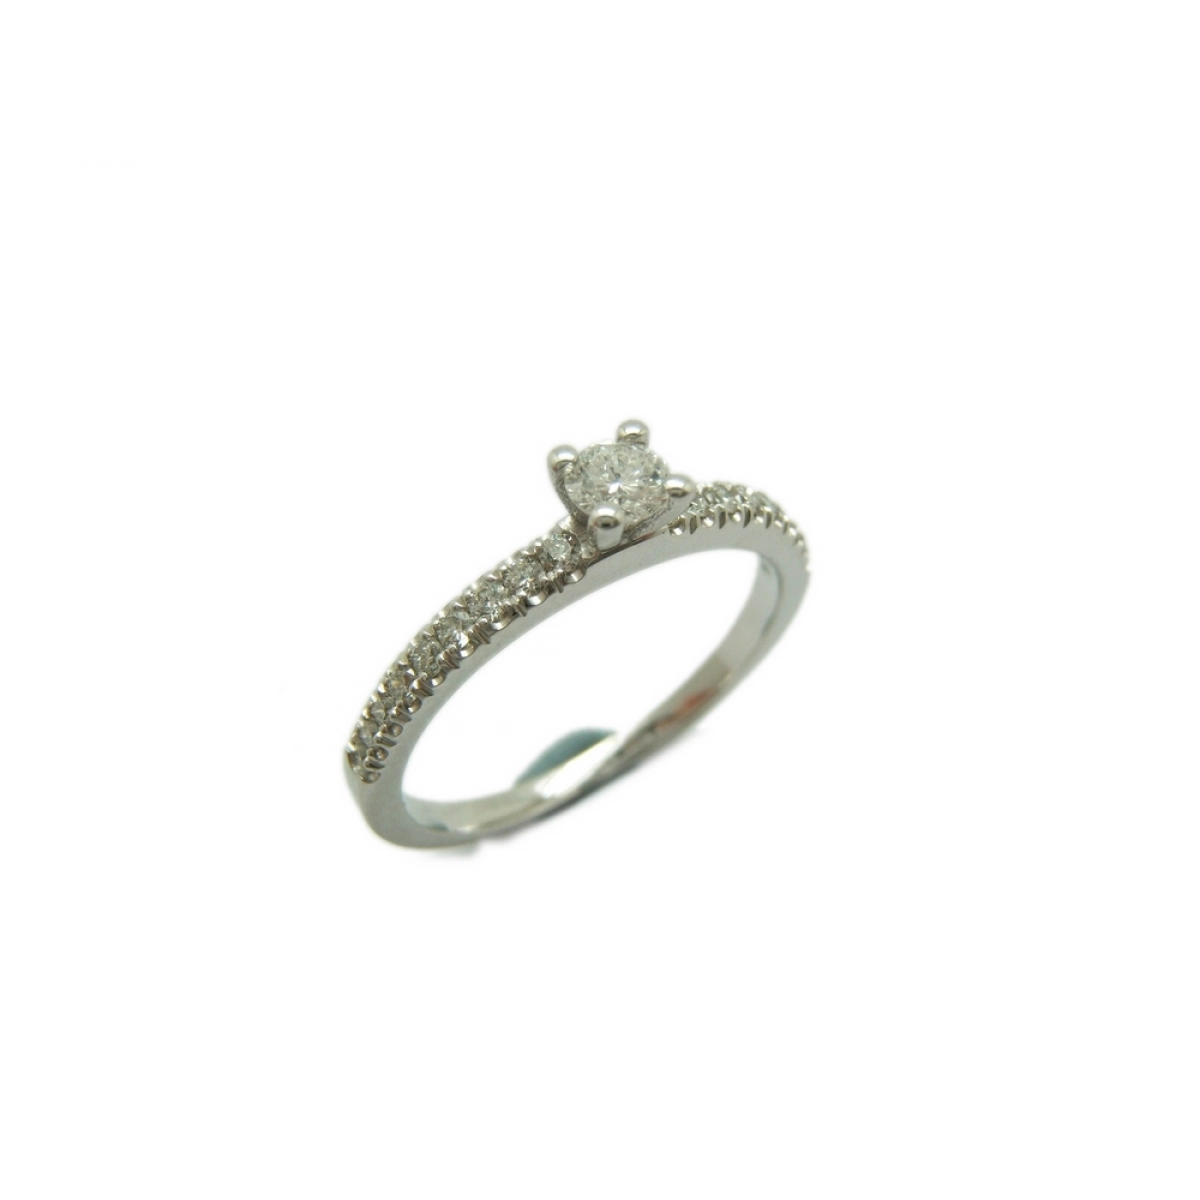 RING SOLITAIRE WHITE GOLD WITH DIAMOND A-407 B-79